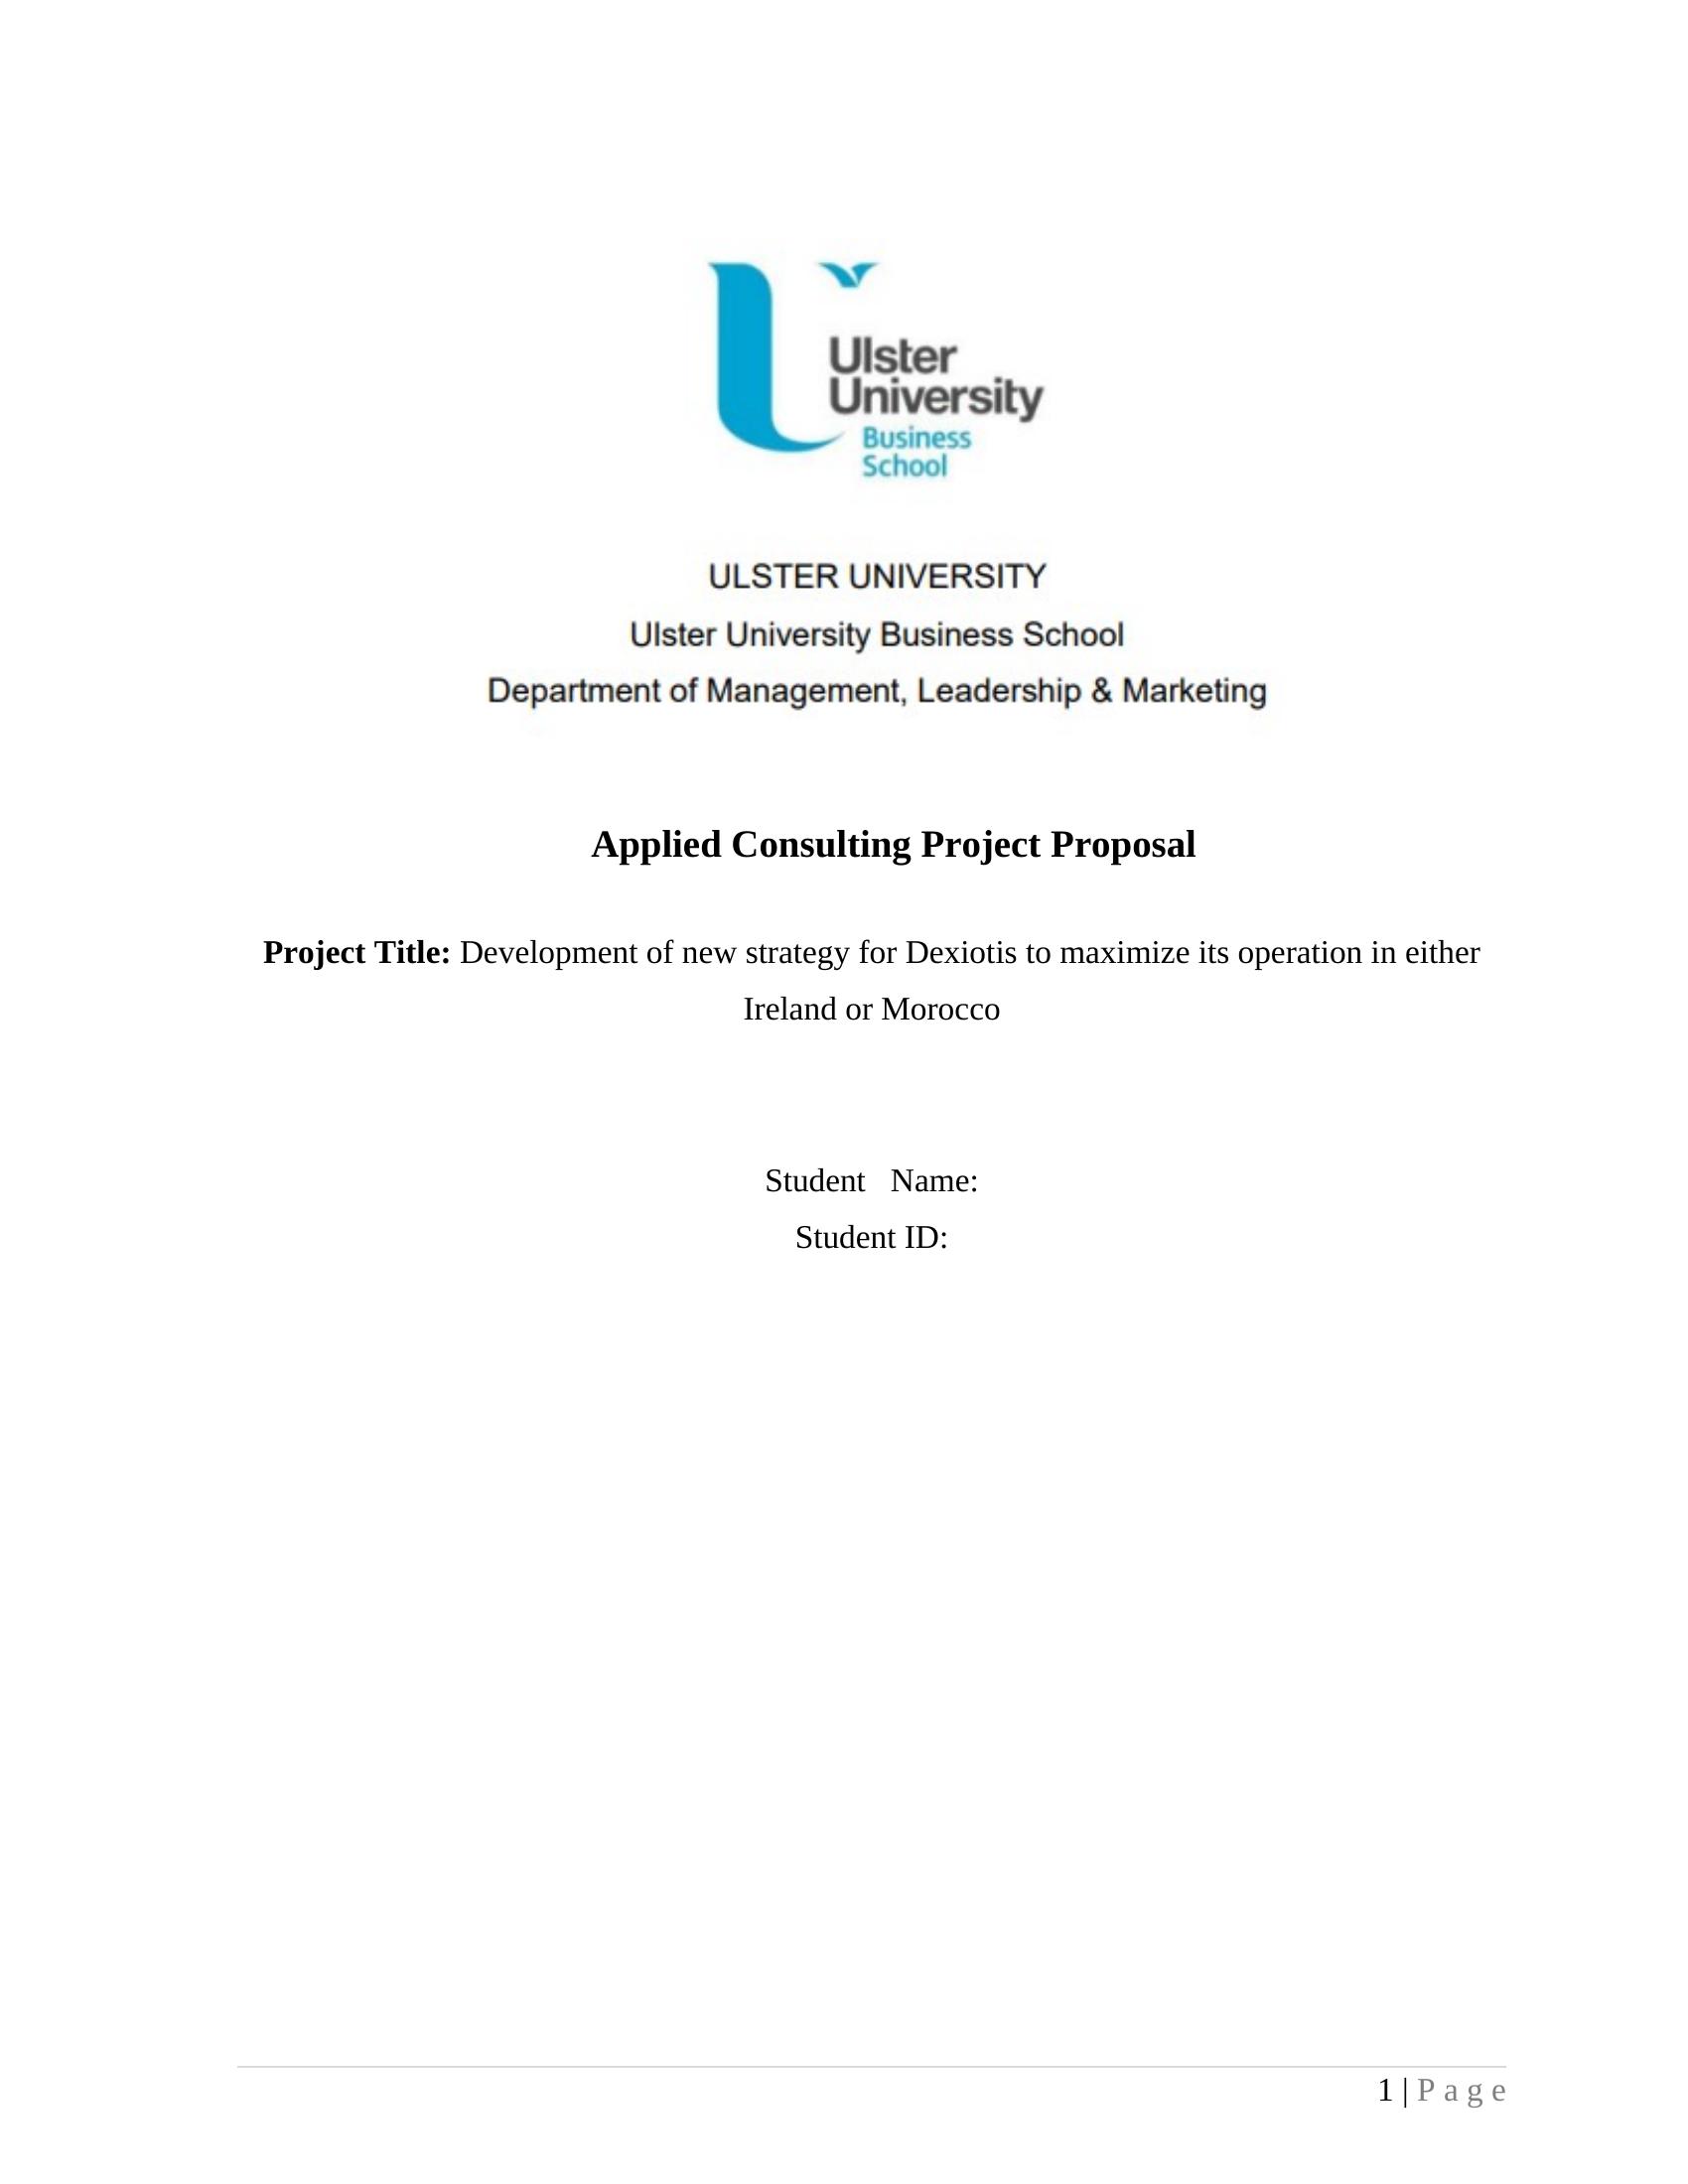 Applied Consulting Project Proposal _ Development of new strategy for Dexiotis to maximize its operation in either